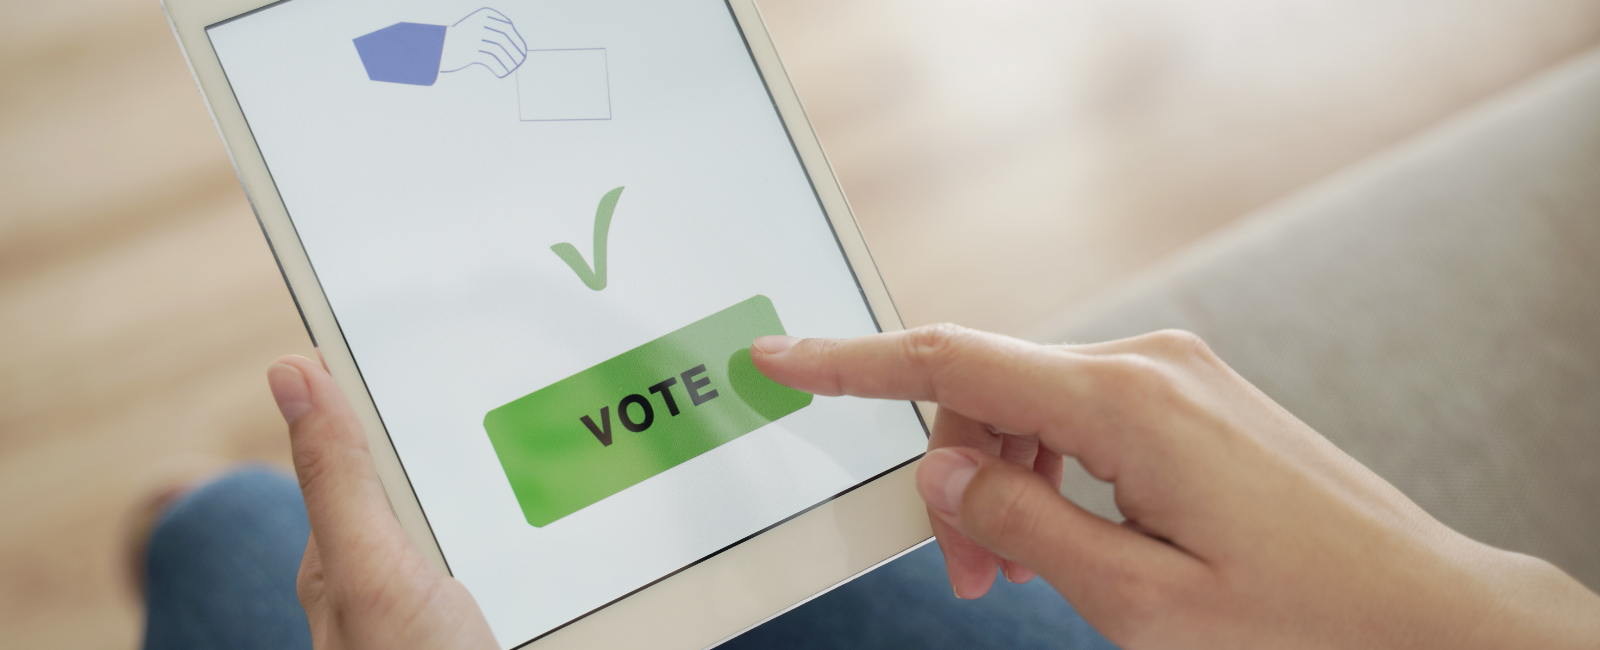 person casting their vote on a tablet